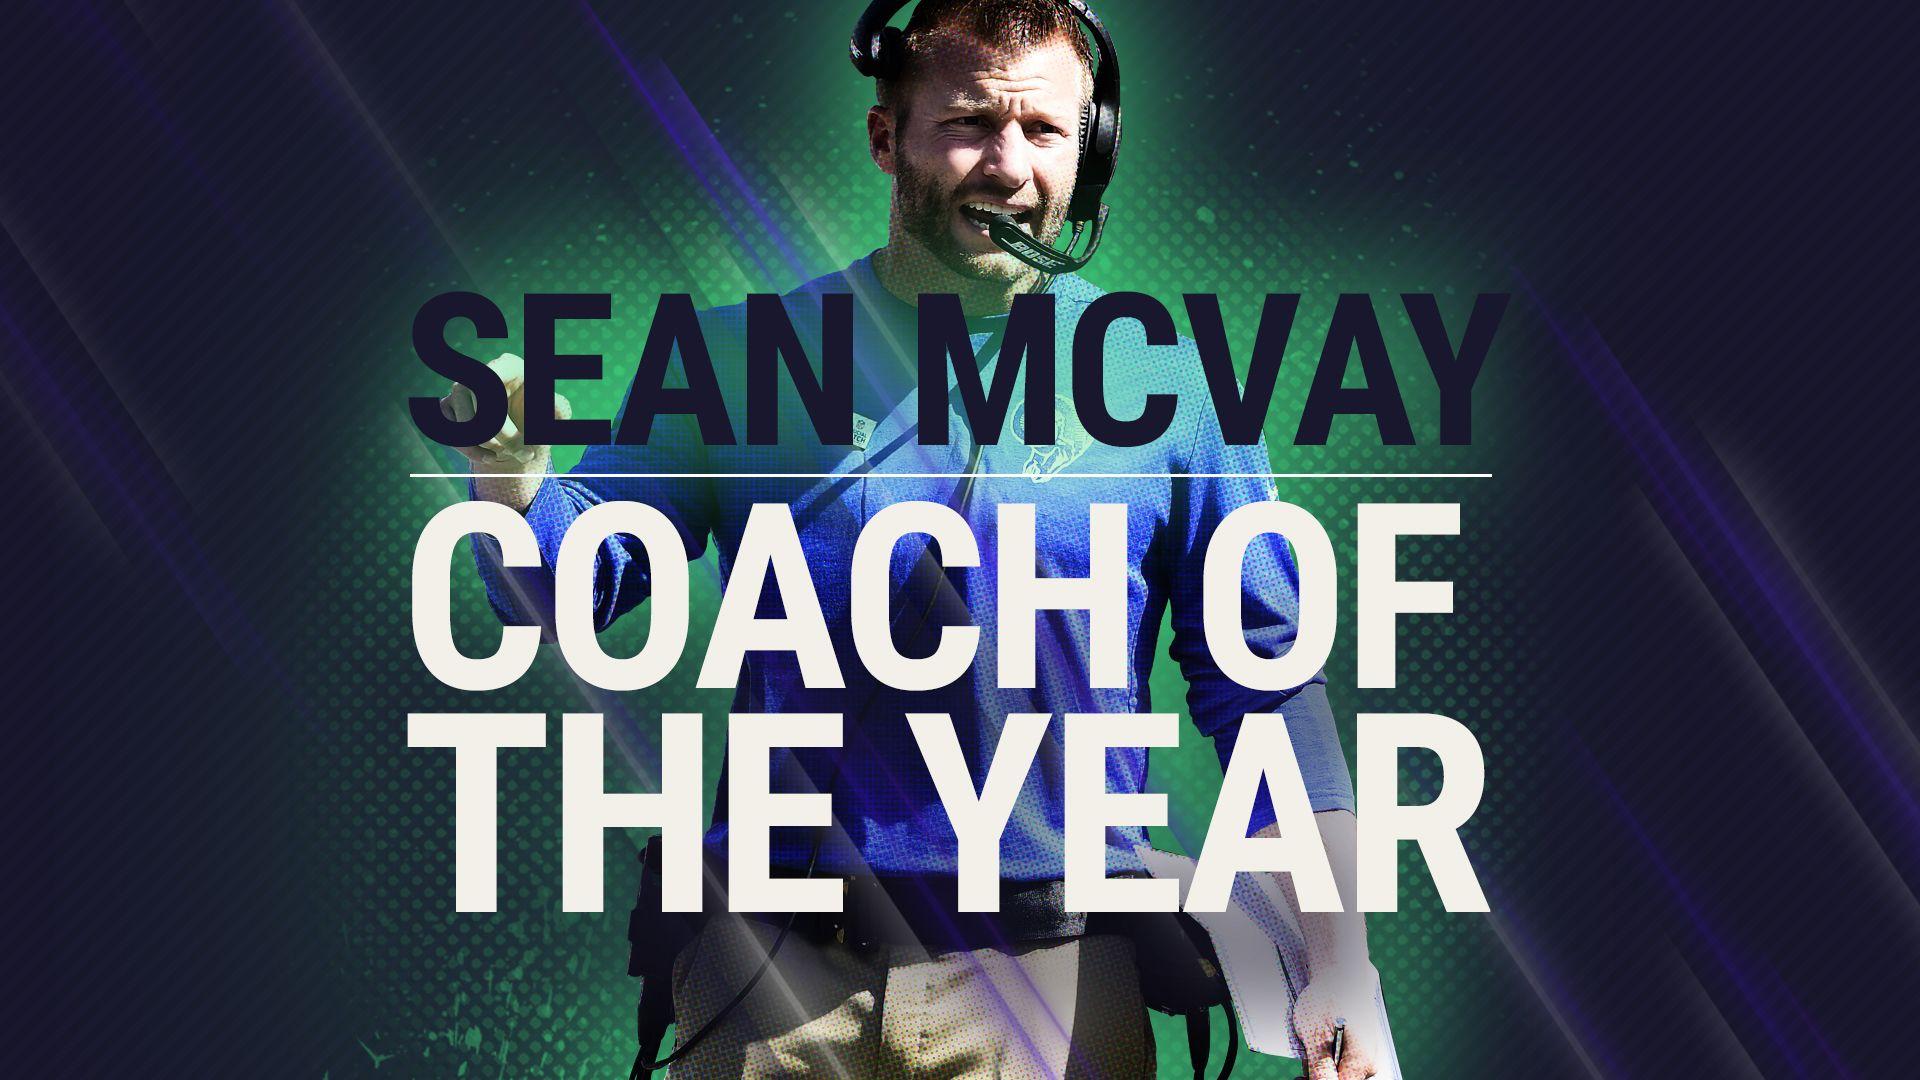 NFL coaches vote Sean McVay Sporting News Coach of the Year for 2017